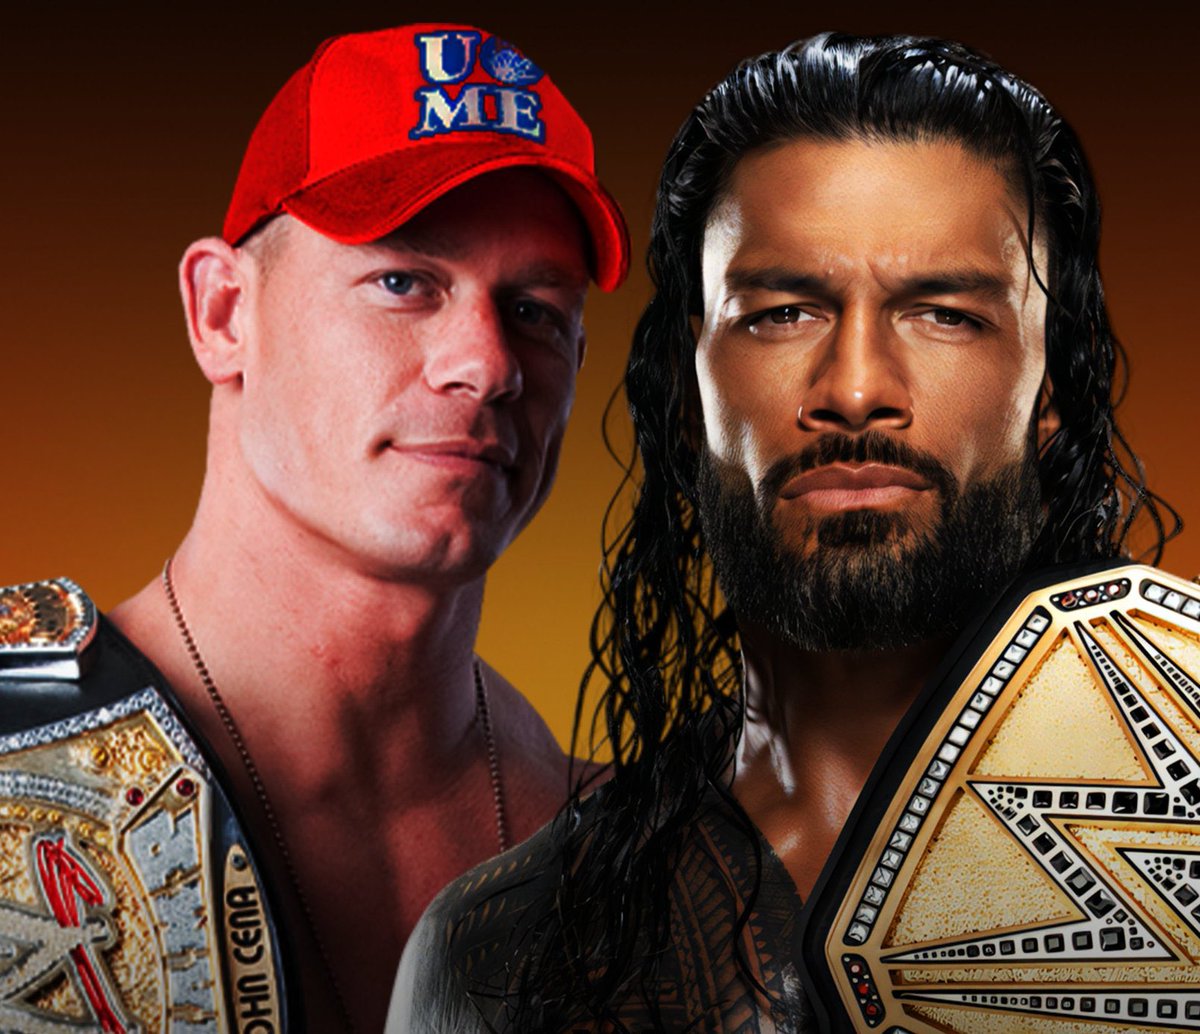 WHO WAS THE BETTER WORLD CHAMPION ALL TIME? 

LIKE for REIGNS 

RETWEET for CENA 

REPLY for BOTH ⚡️